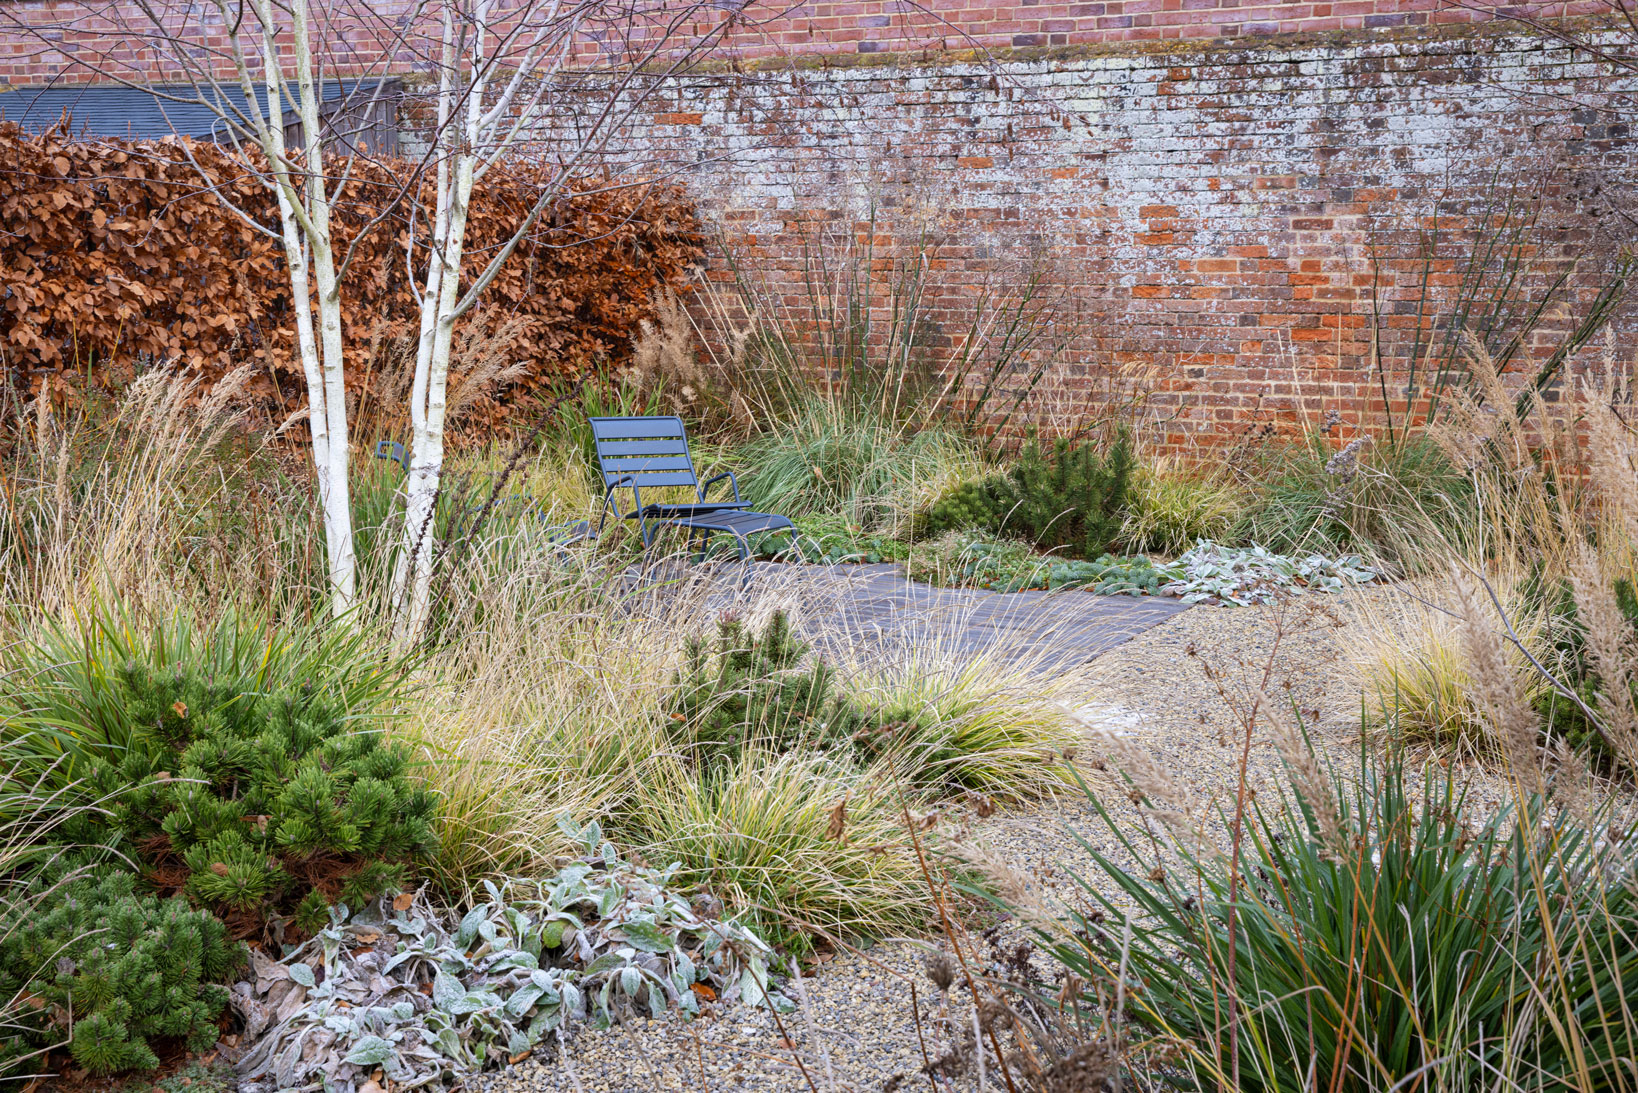 Colm Joseph Suffolk walled garden winter texture gravel path birch trees multi-stem seating area clay pavers old wall